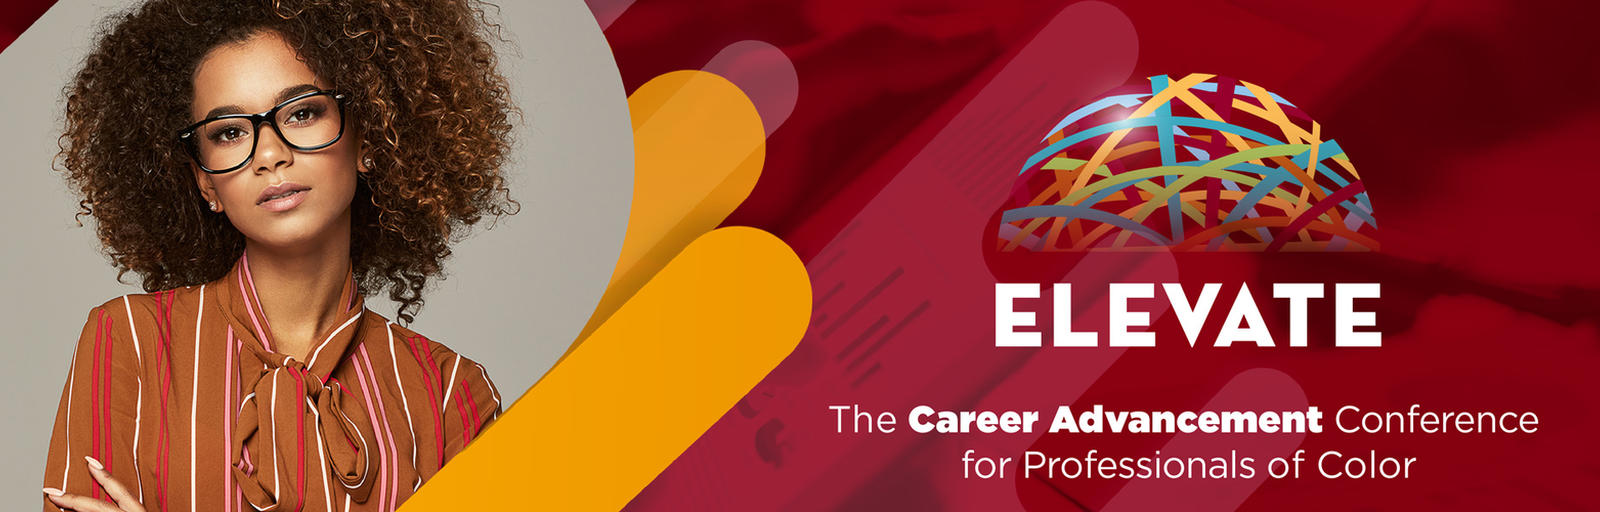 A graphic colorful globe is above the words "Elevate: The Career Advancement Conference for Professionals of Color" and a photo of a professional posing for a photo.